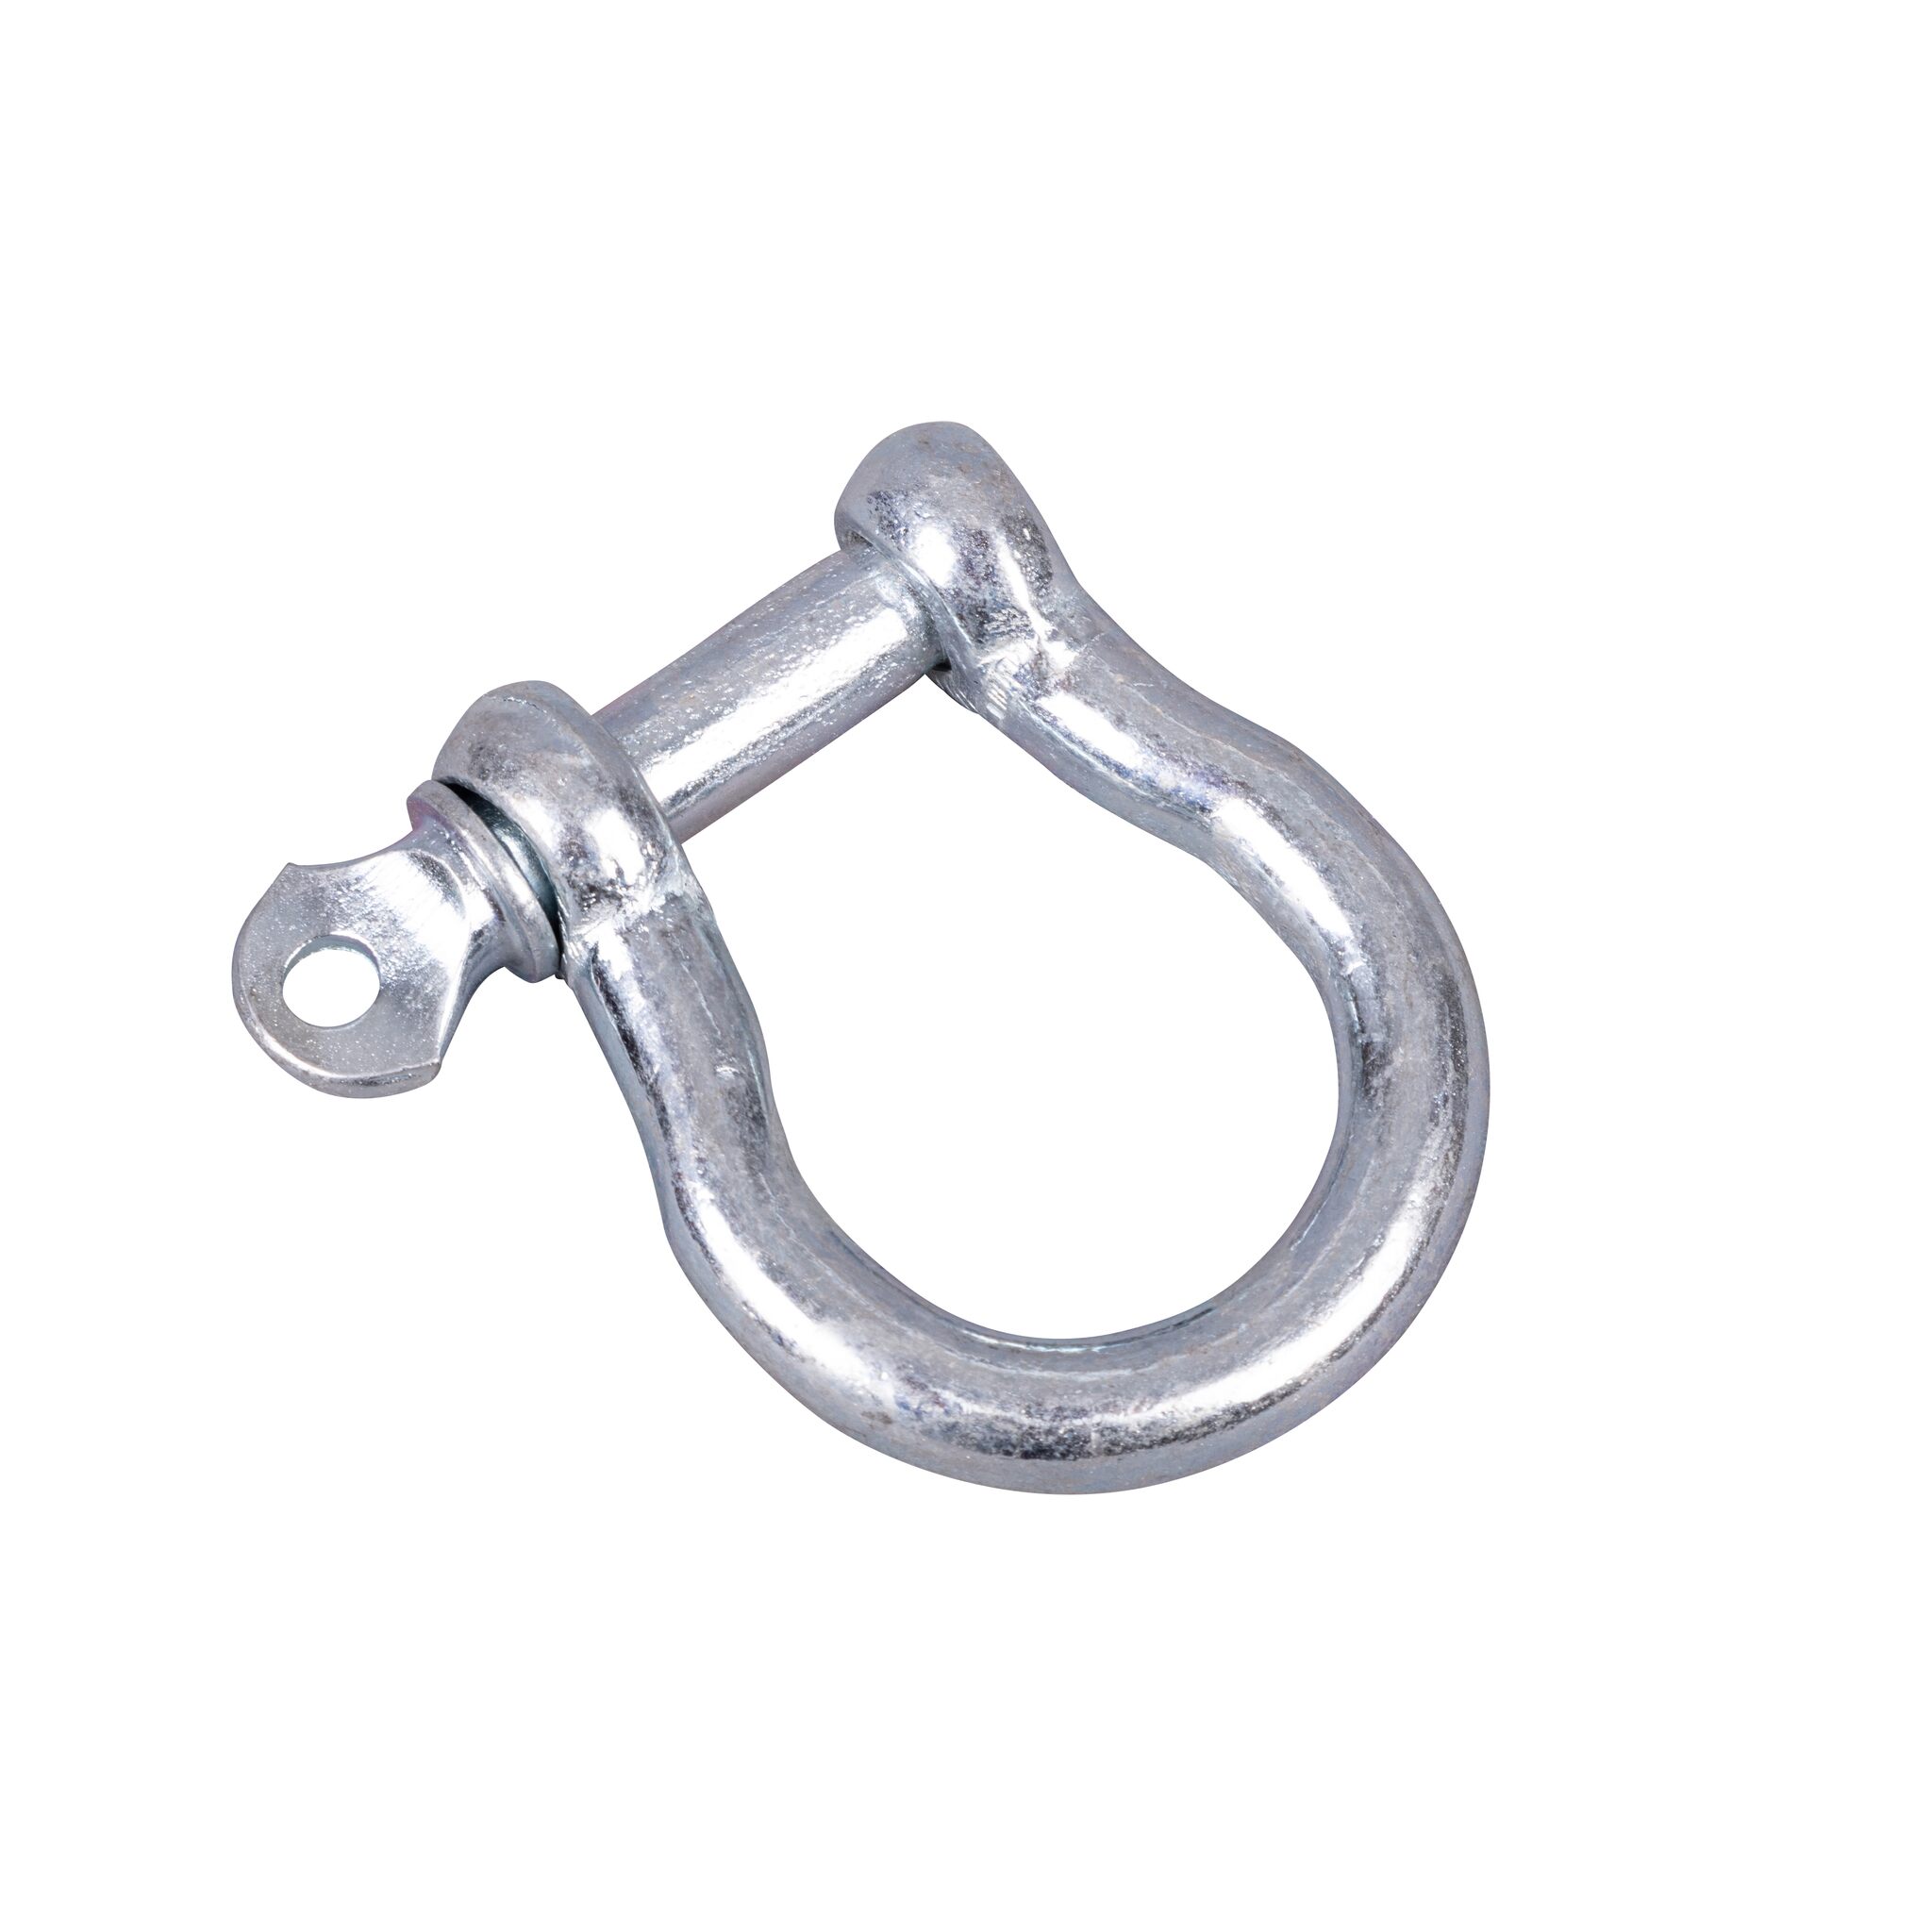 Shackle curved, galvanized